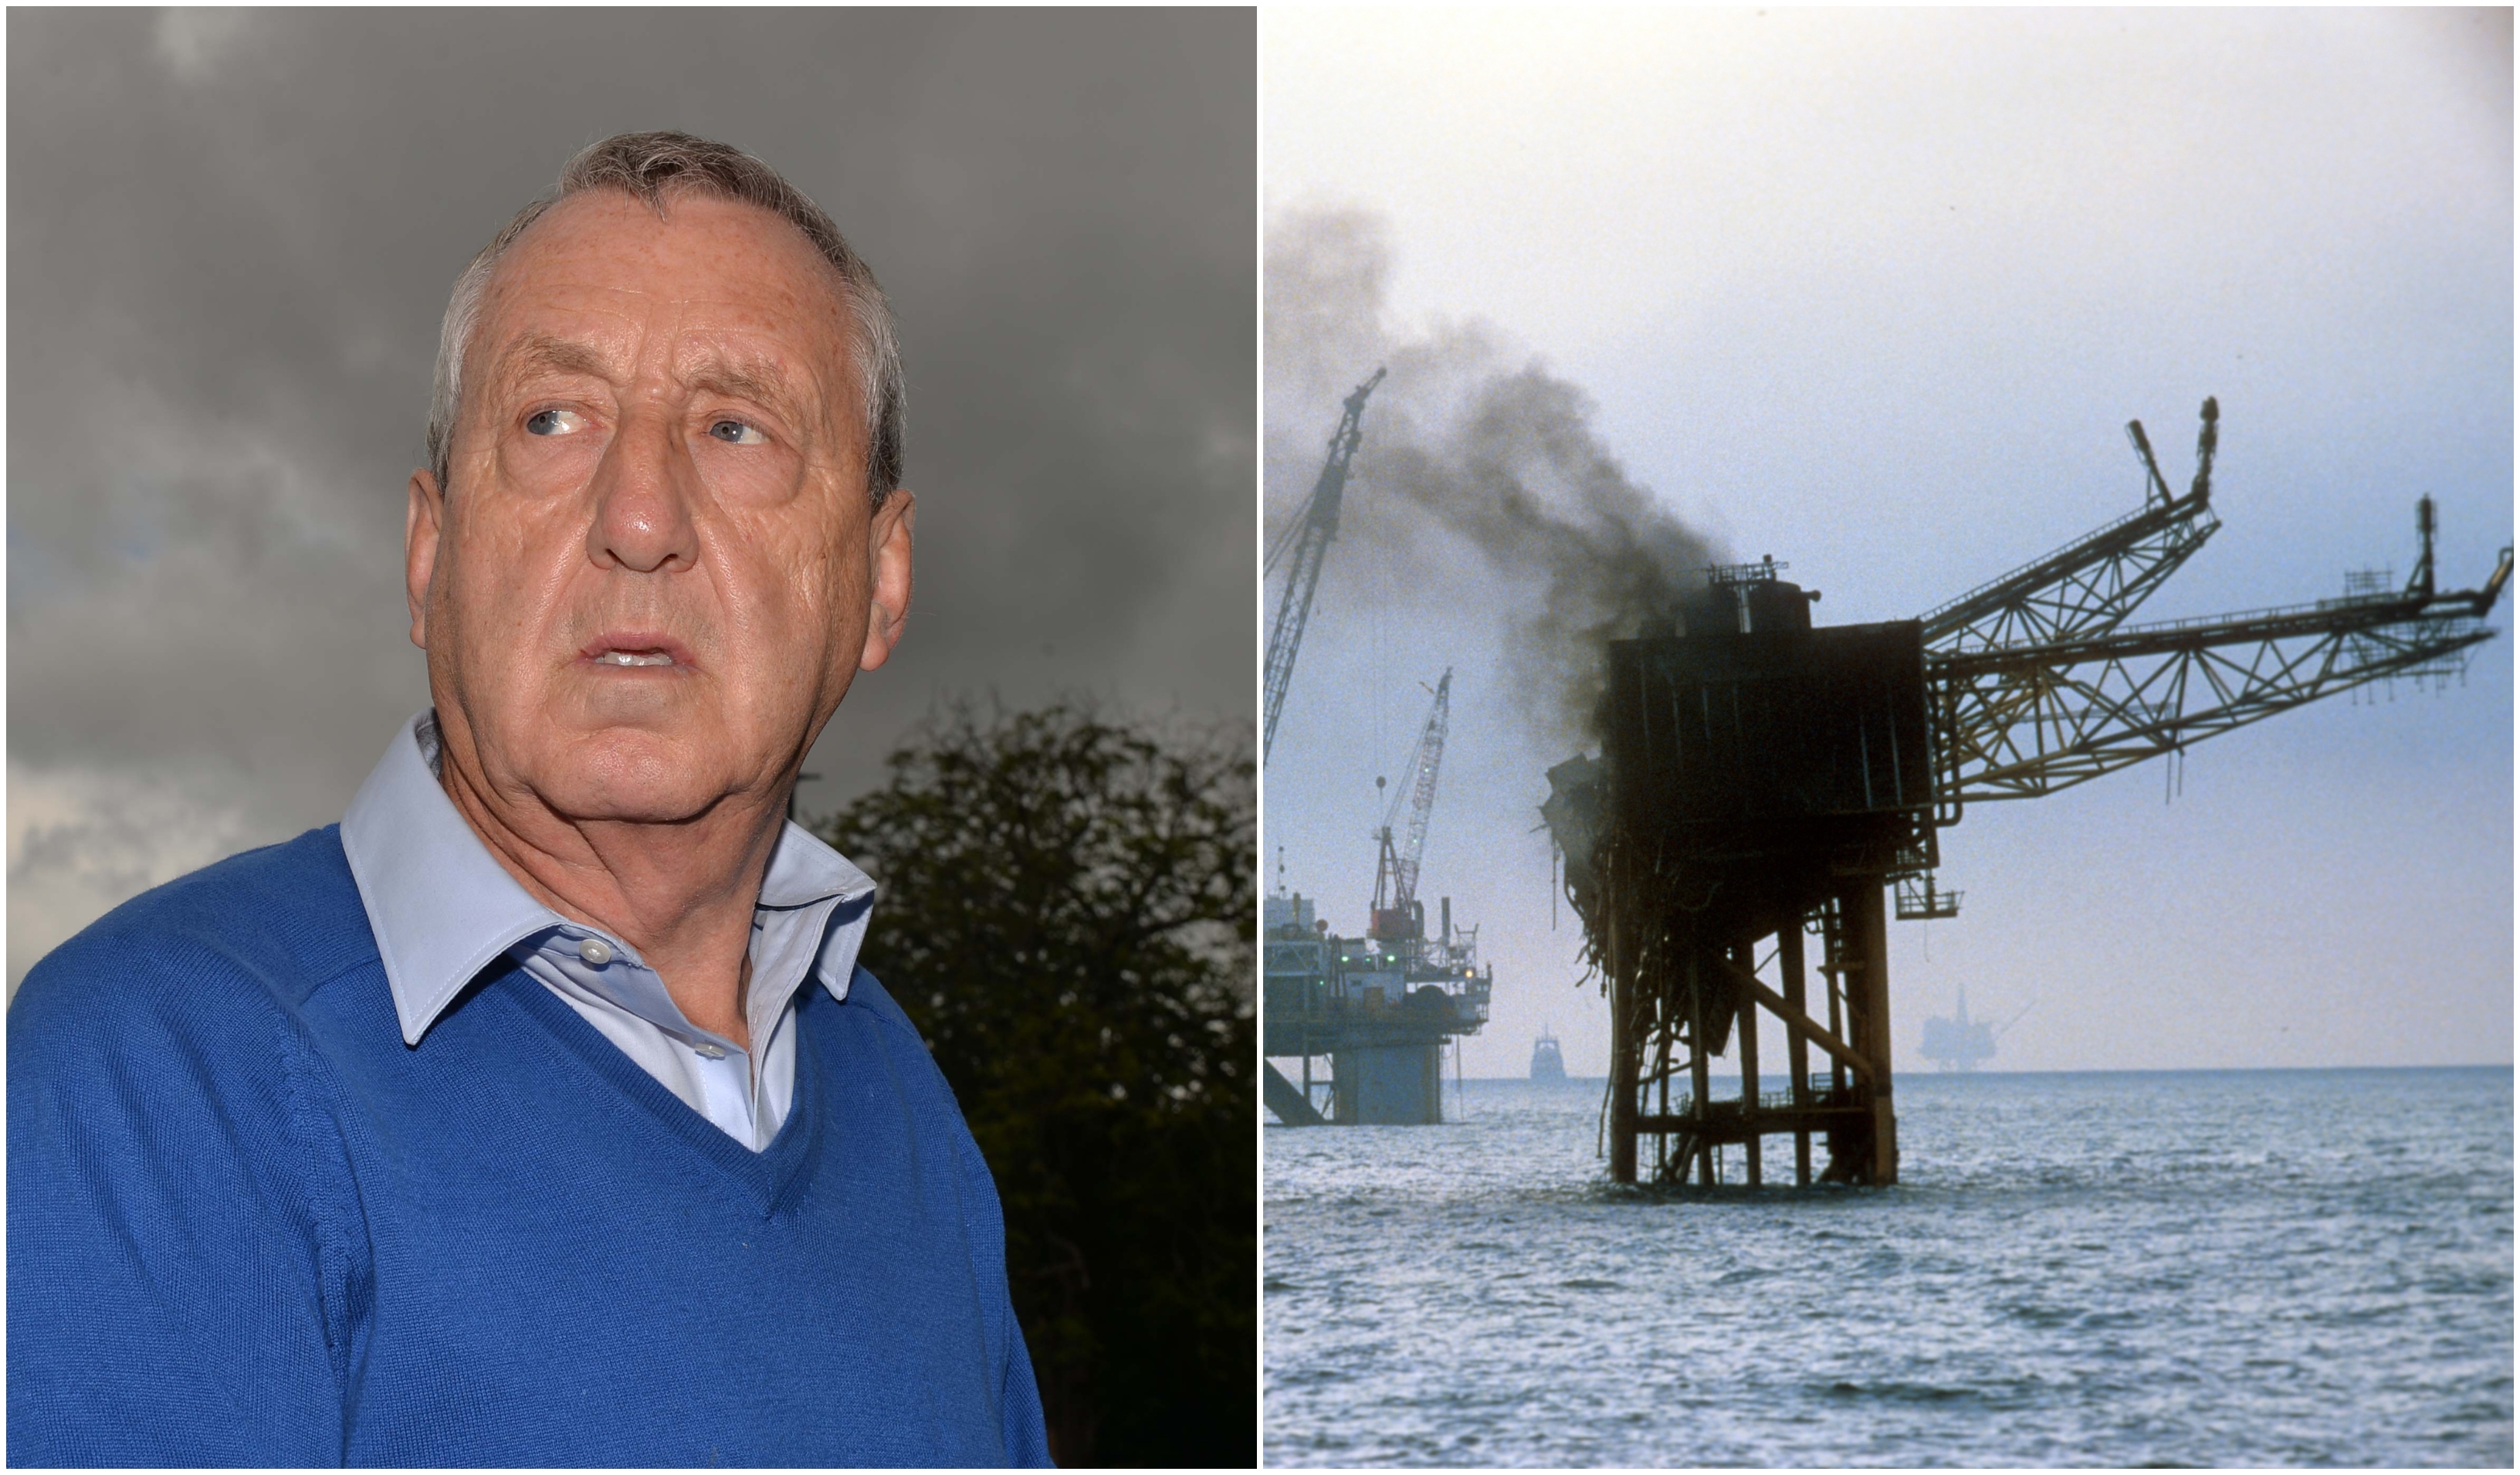 Geoff Bollands survived the Piper Alpha disaster (Paul Vicente & PA Archive)